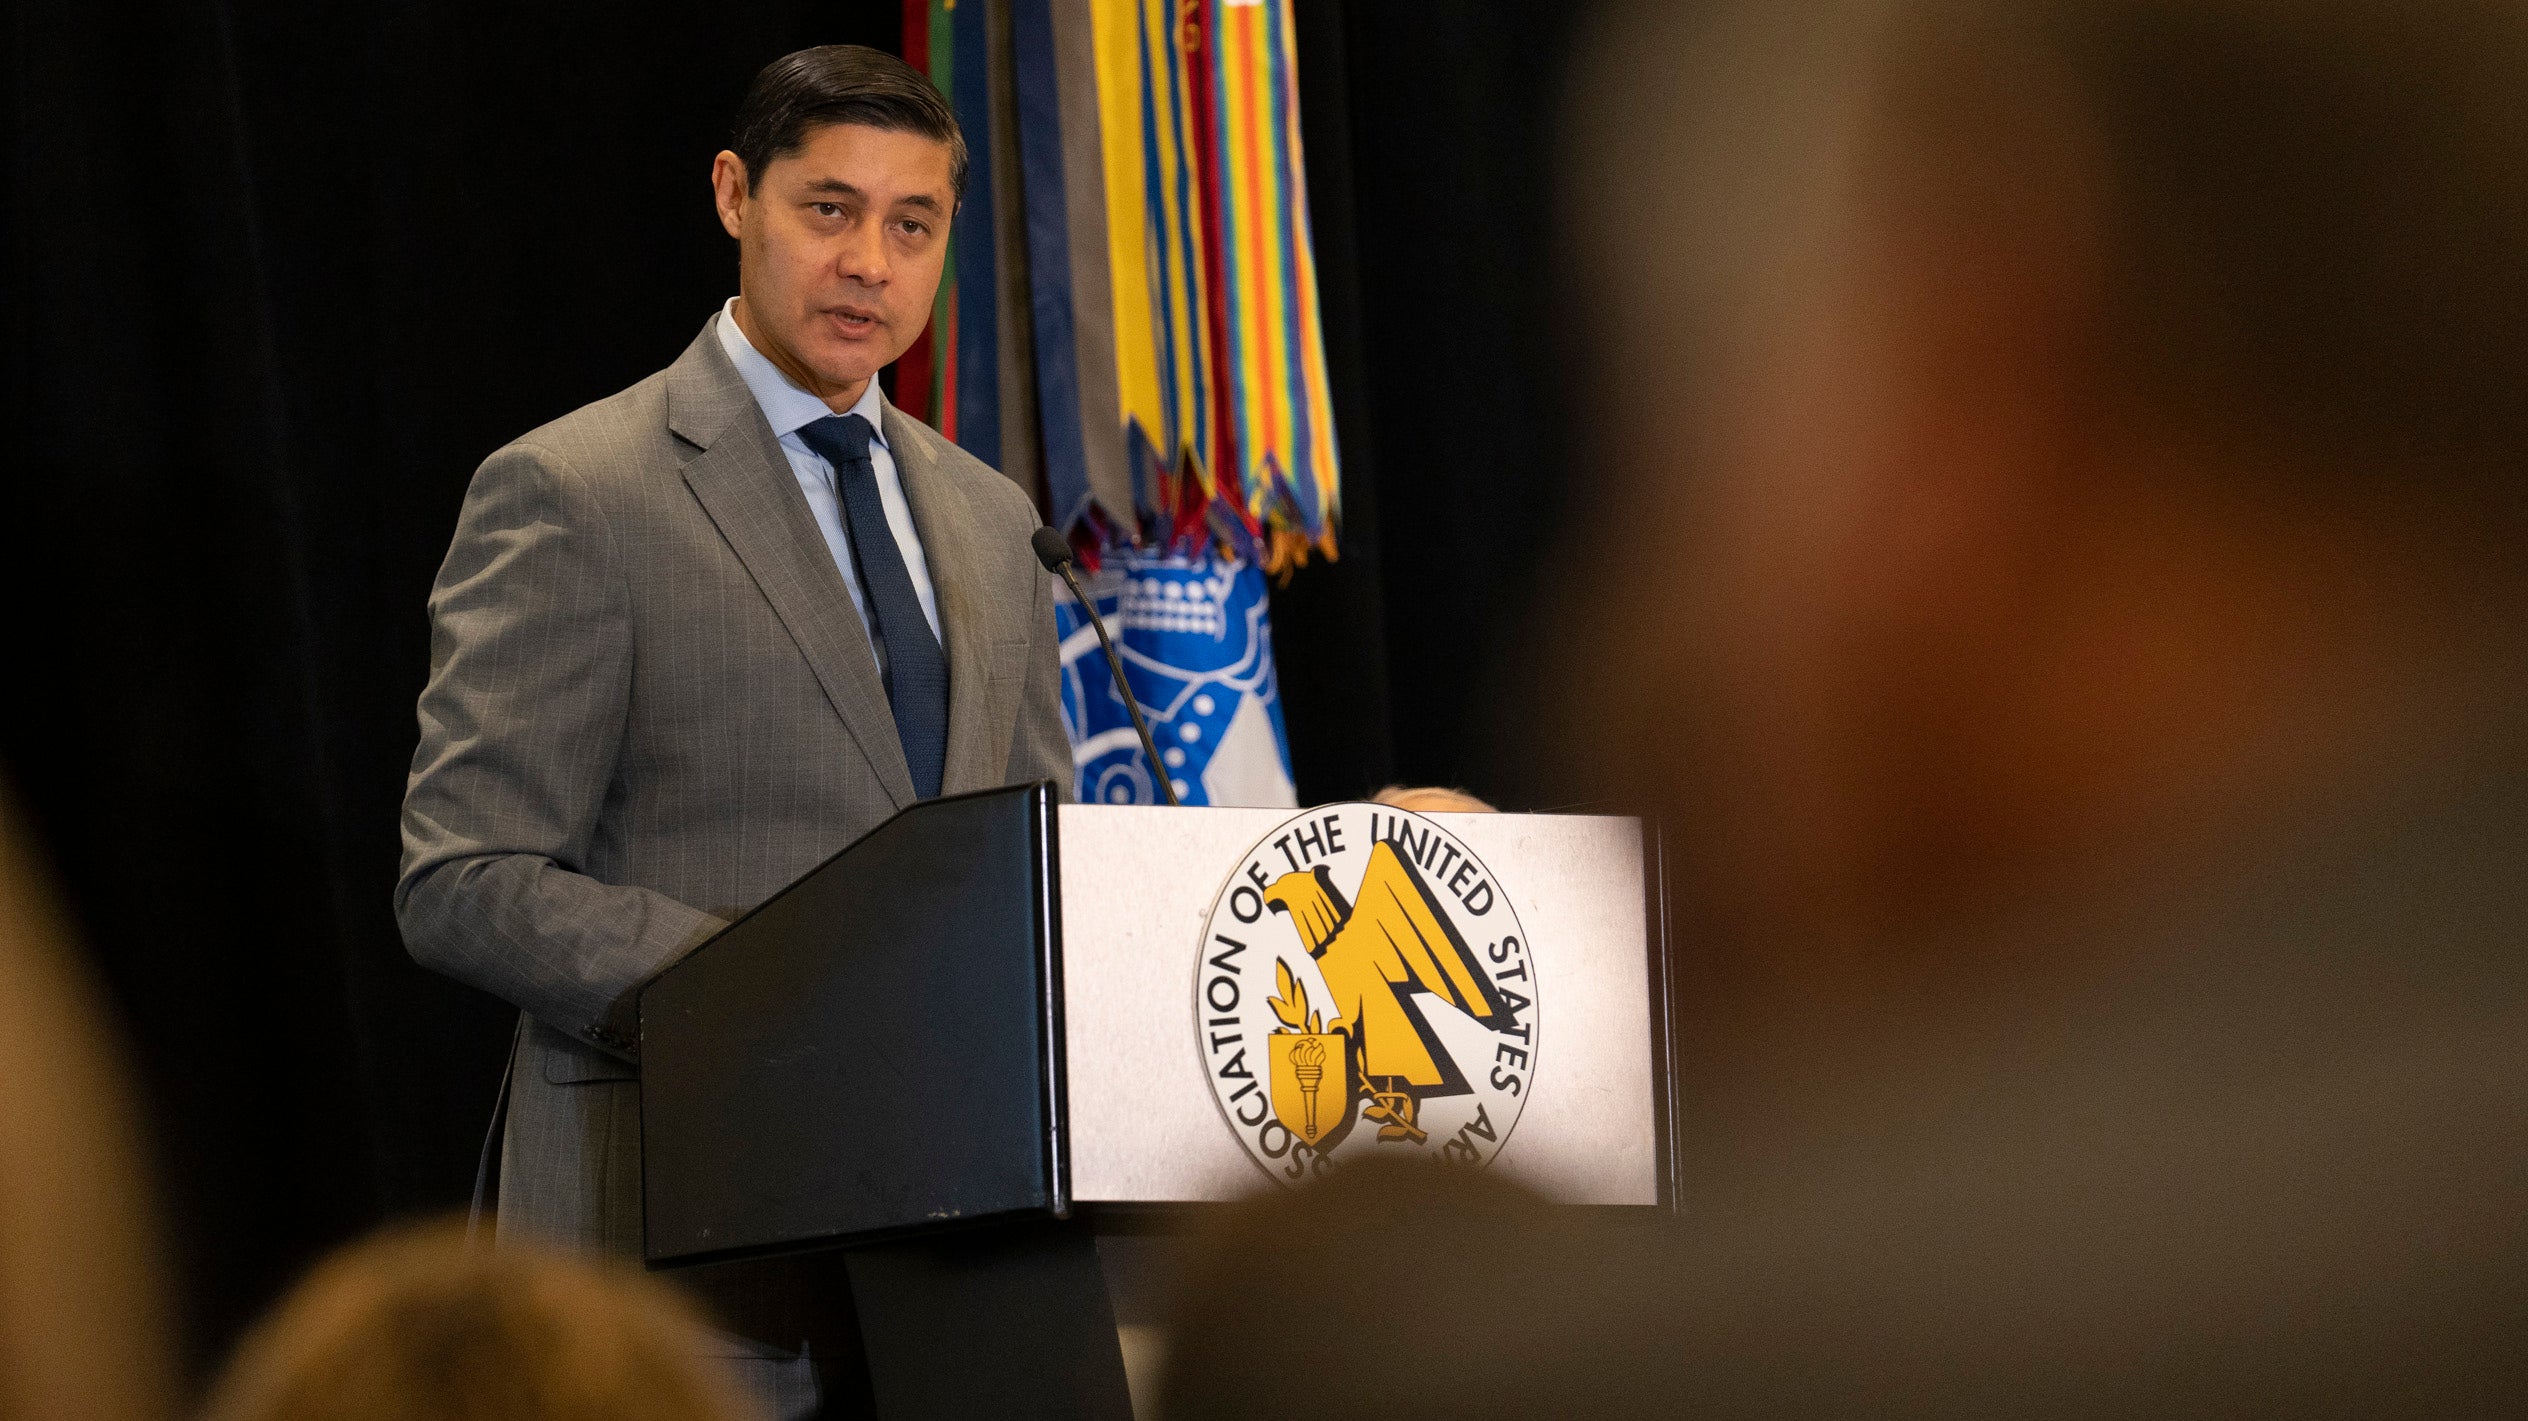 Mario Diaz, Deputy Undersecretary for the Army, speaks during the Army Civilian Forum at AUSA 2022 Annual Meeting in Washington, D.C., Wednesday, Oct. 12, 2022. (Eric Lee for AUSA)